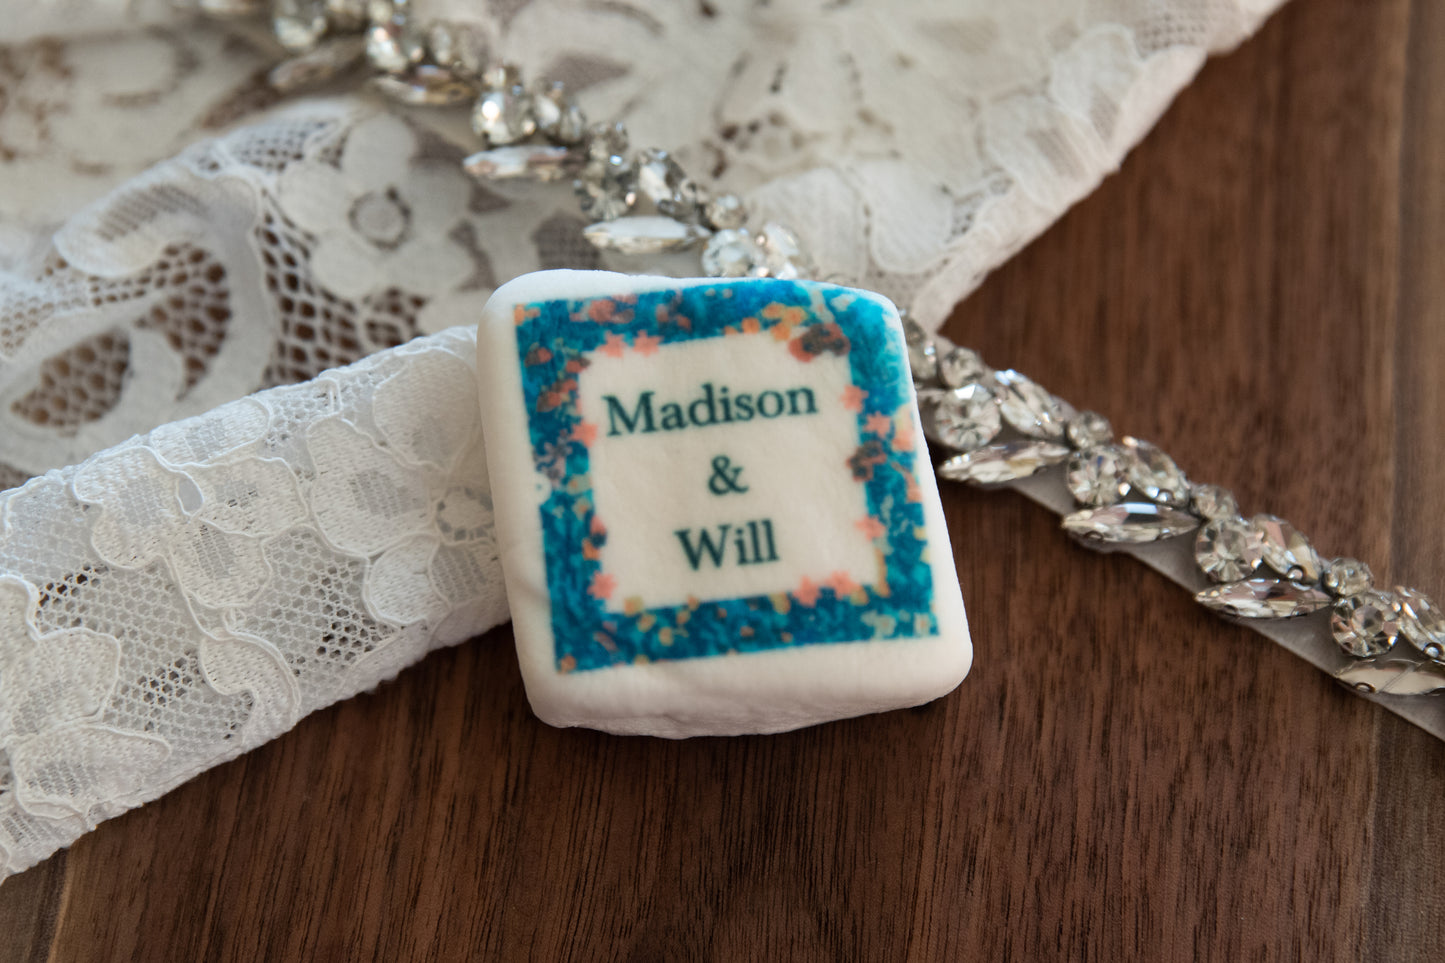 S'more Wedding Favors with Custom Text or Images - A Unique Treat for Guests